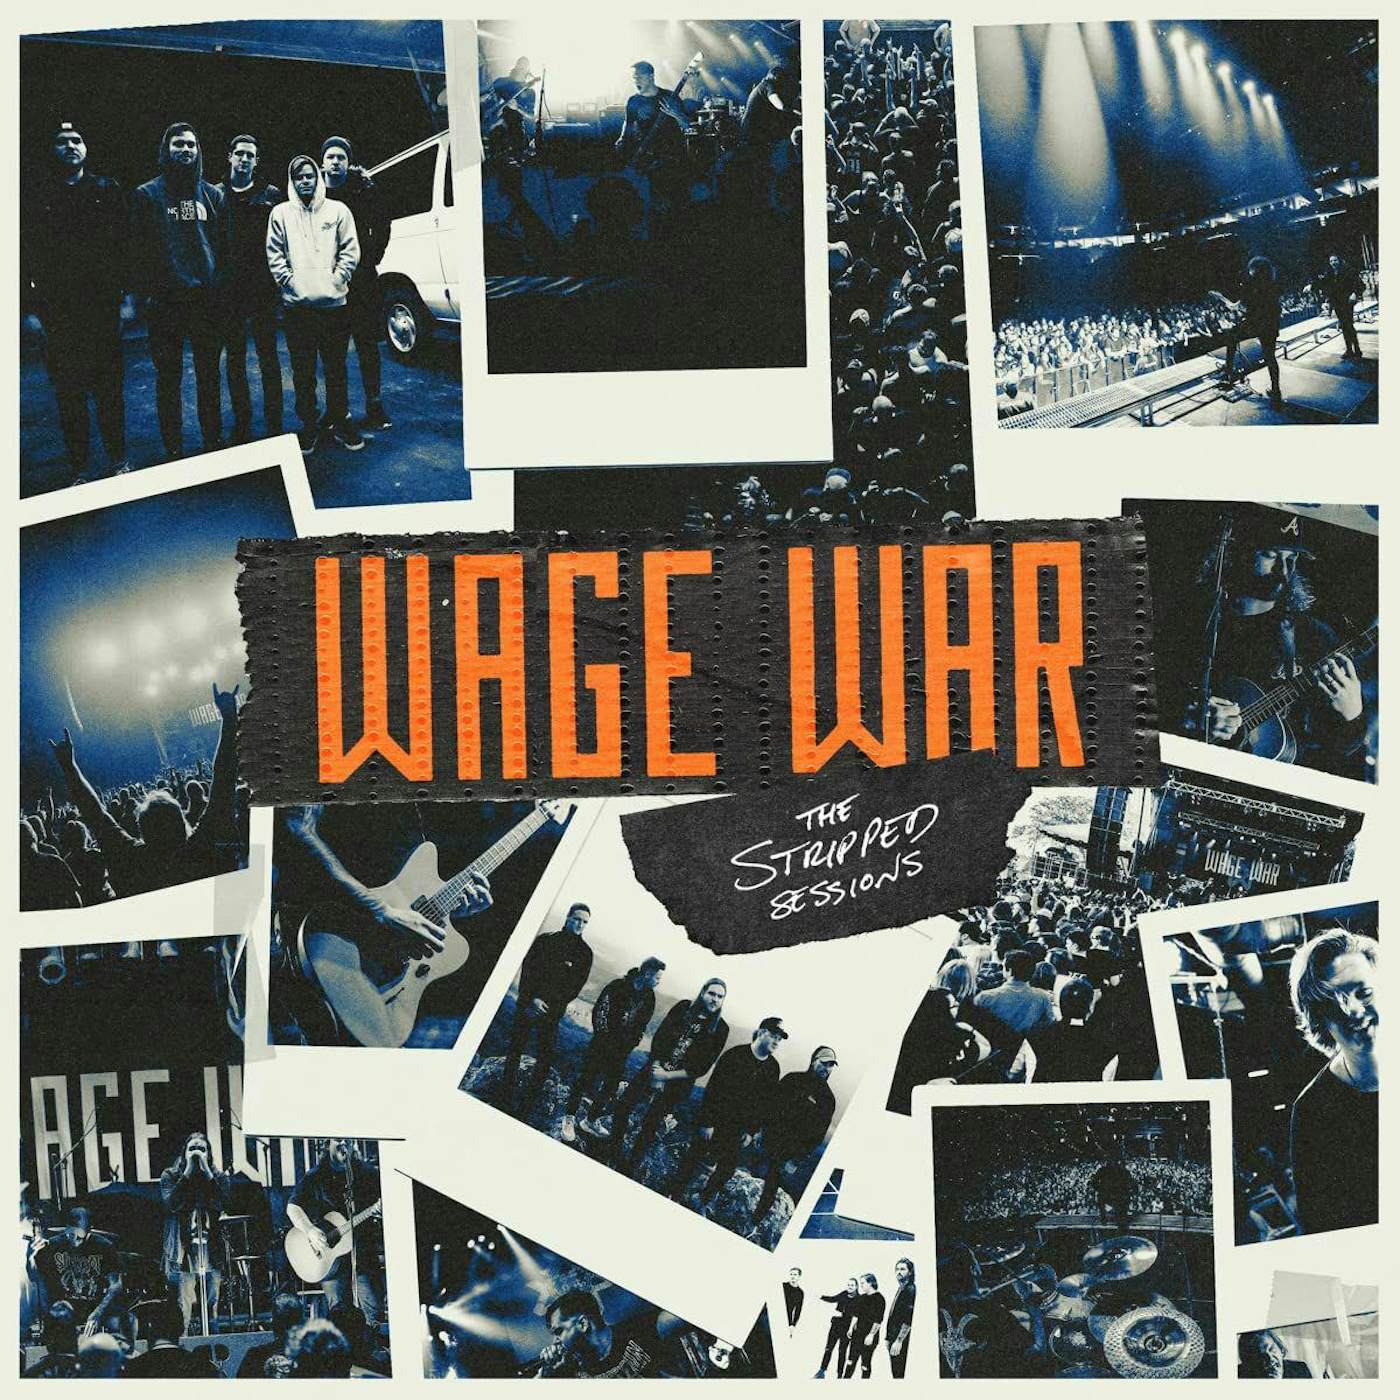 Wage War Stripped Sessions Vinyl Record